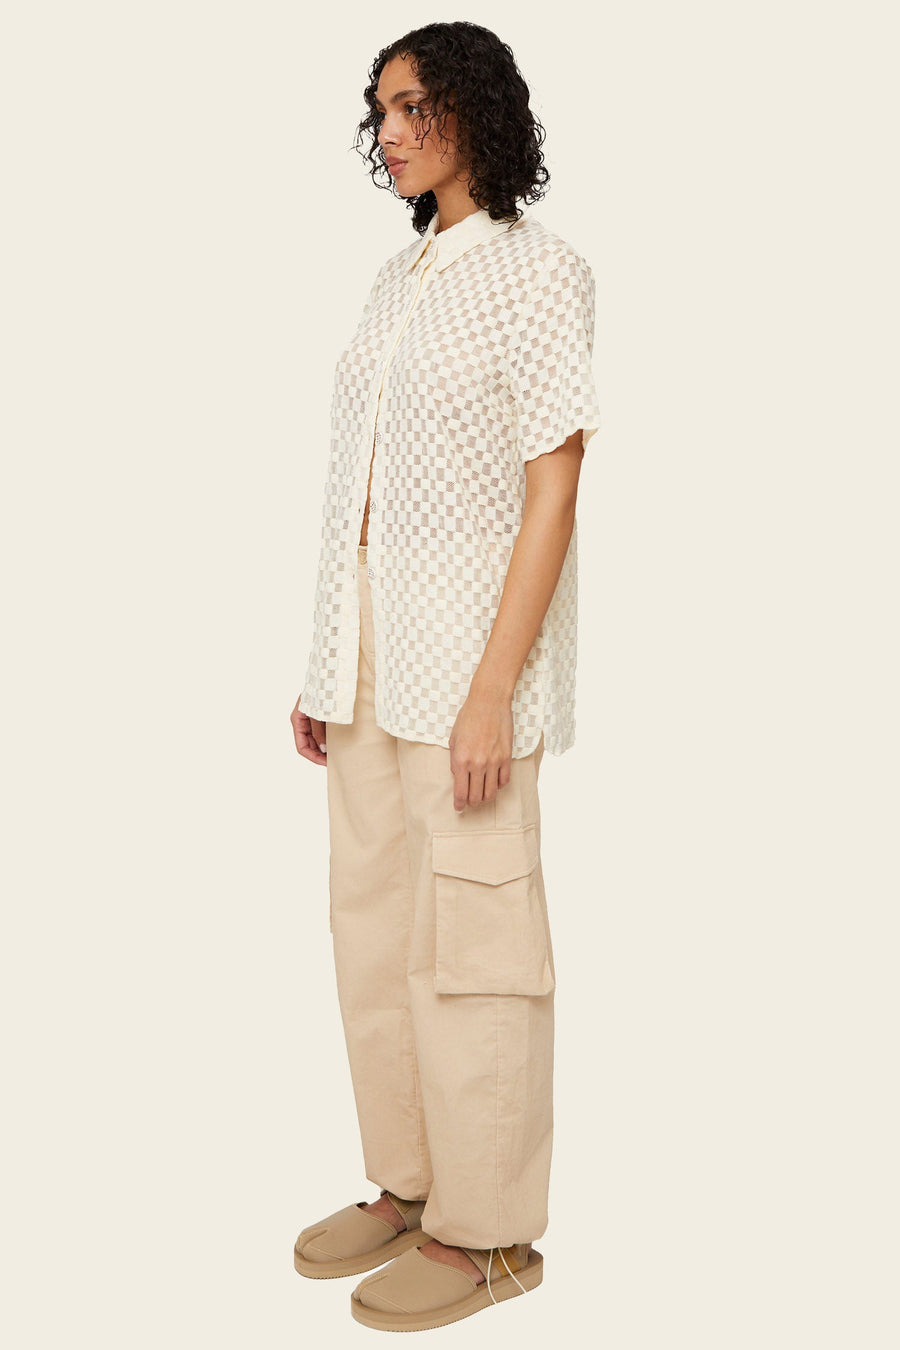 Find Me Now Harmony Mesh Checkered Button Down | White Noise